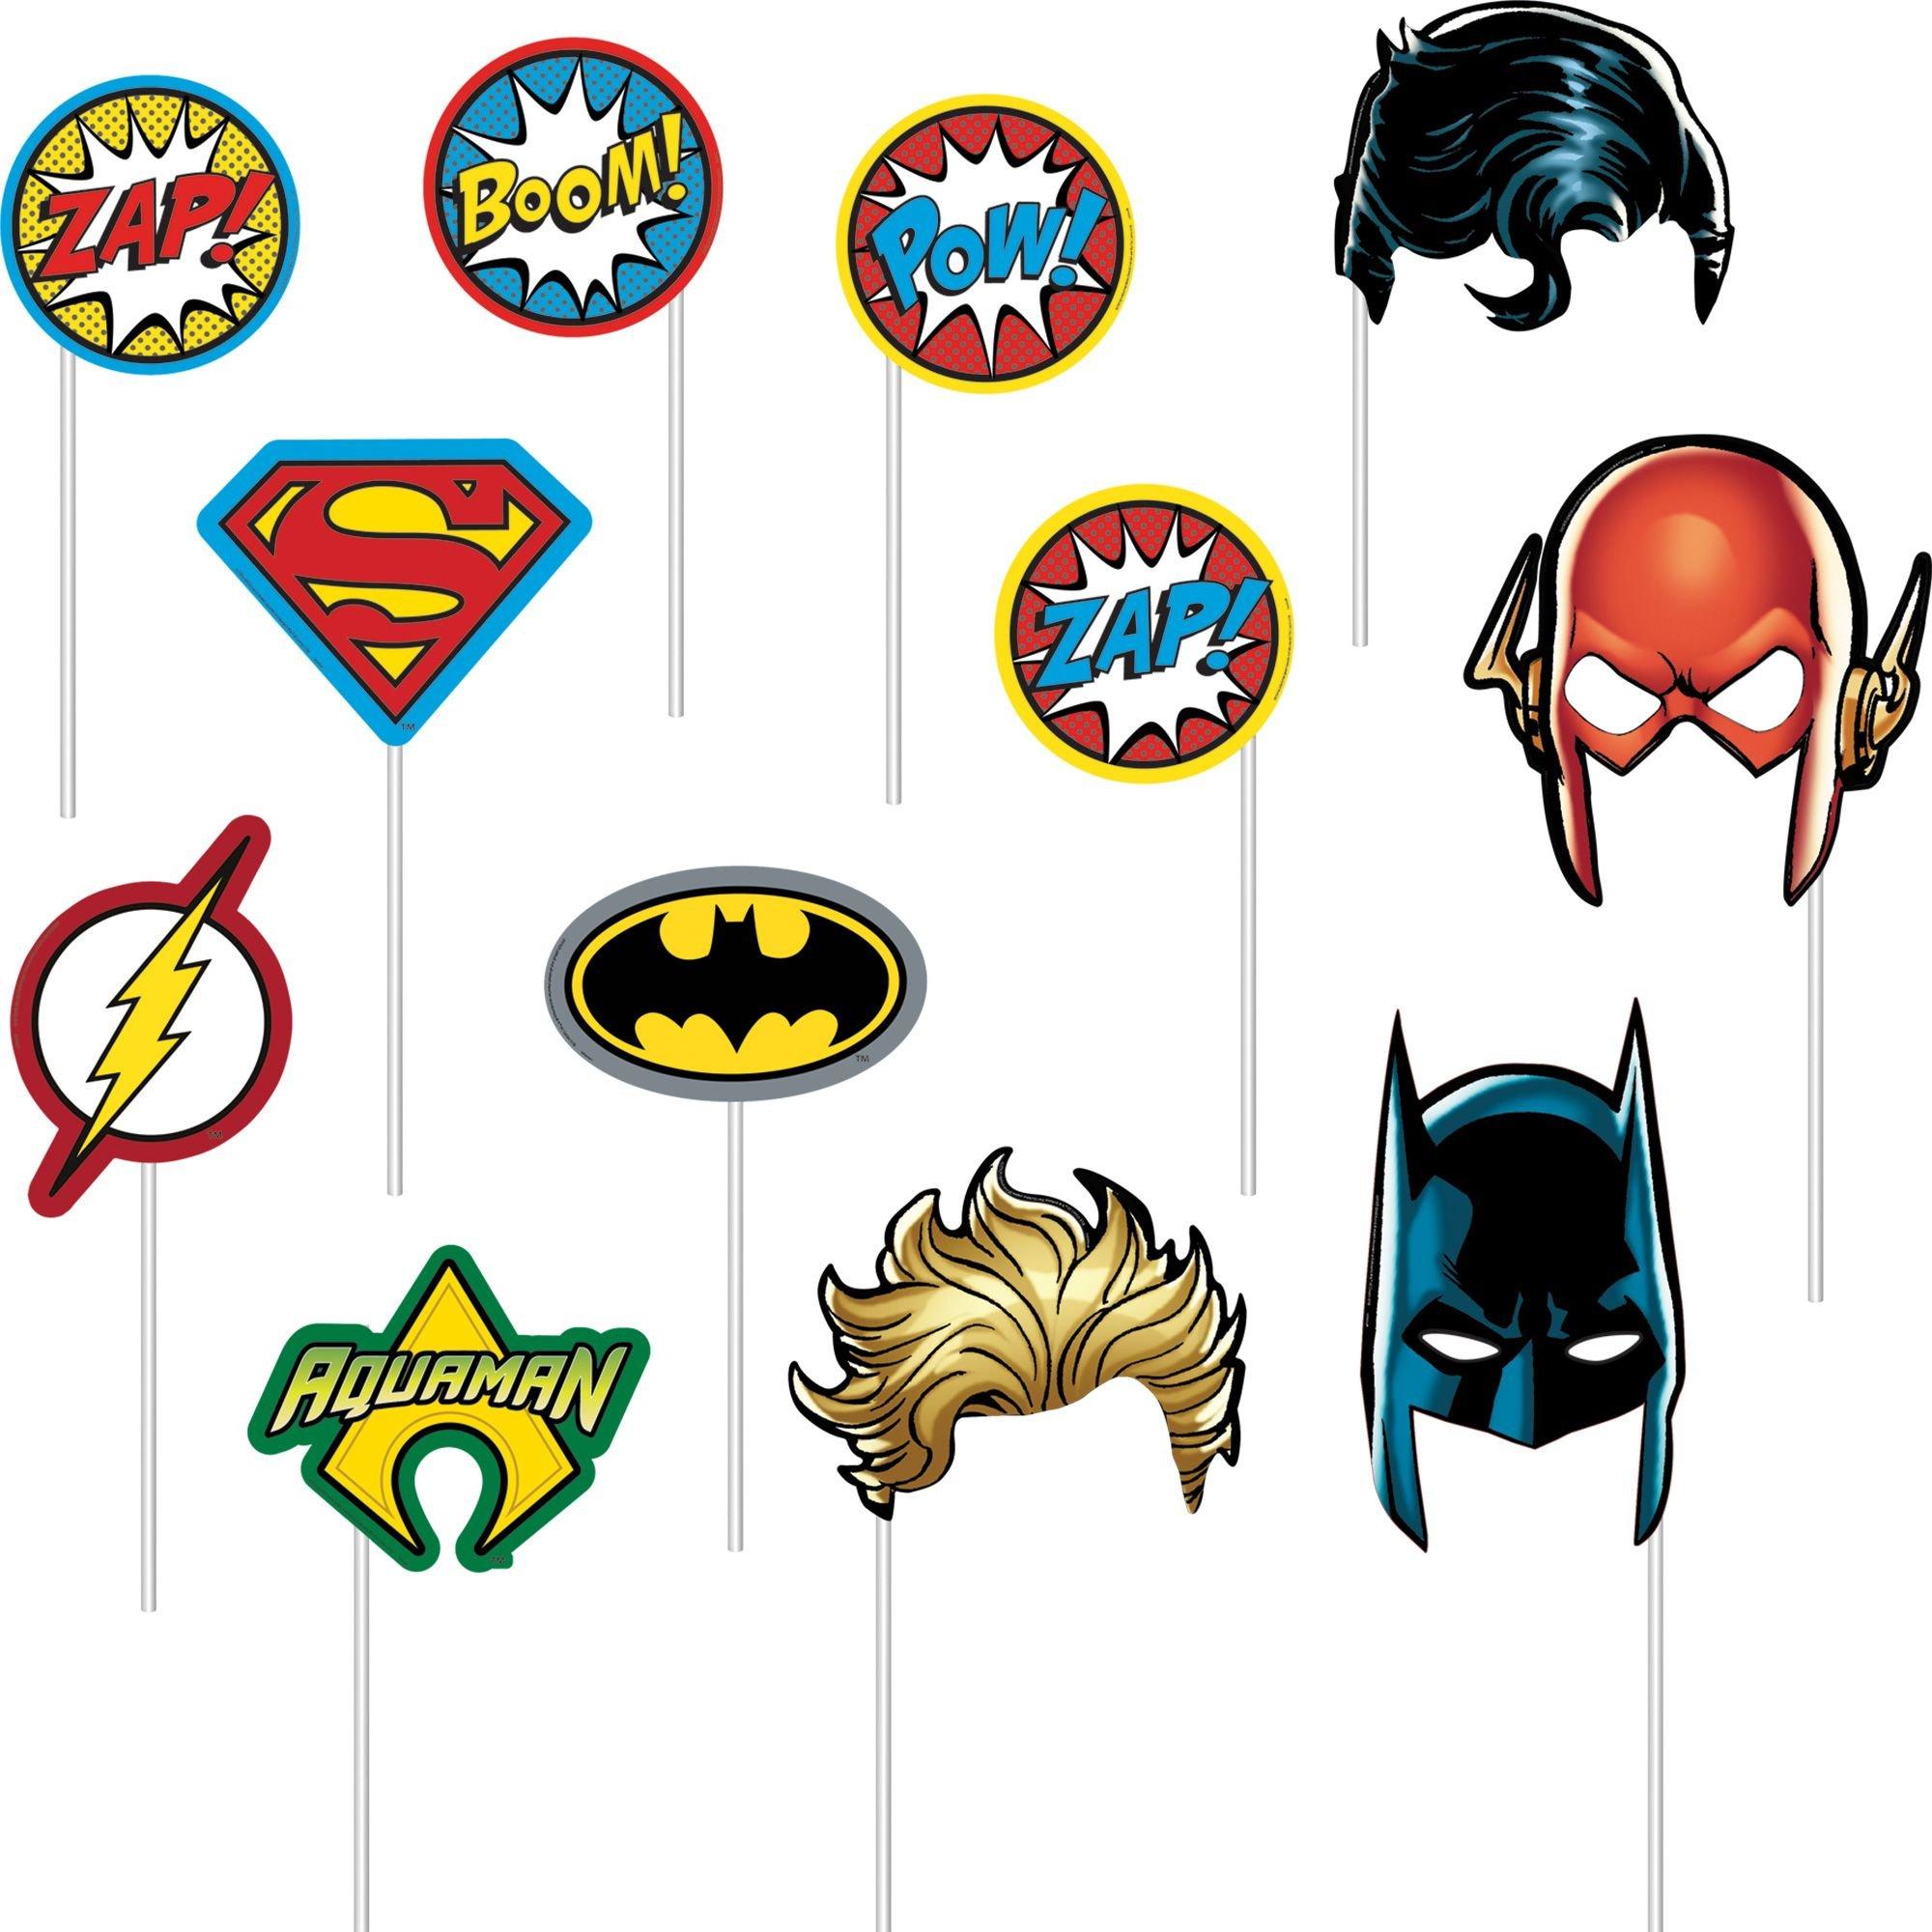 Justice League Heroes Unite Photo Booth Kit 16pc | Party City